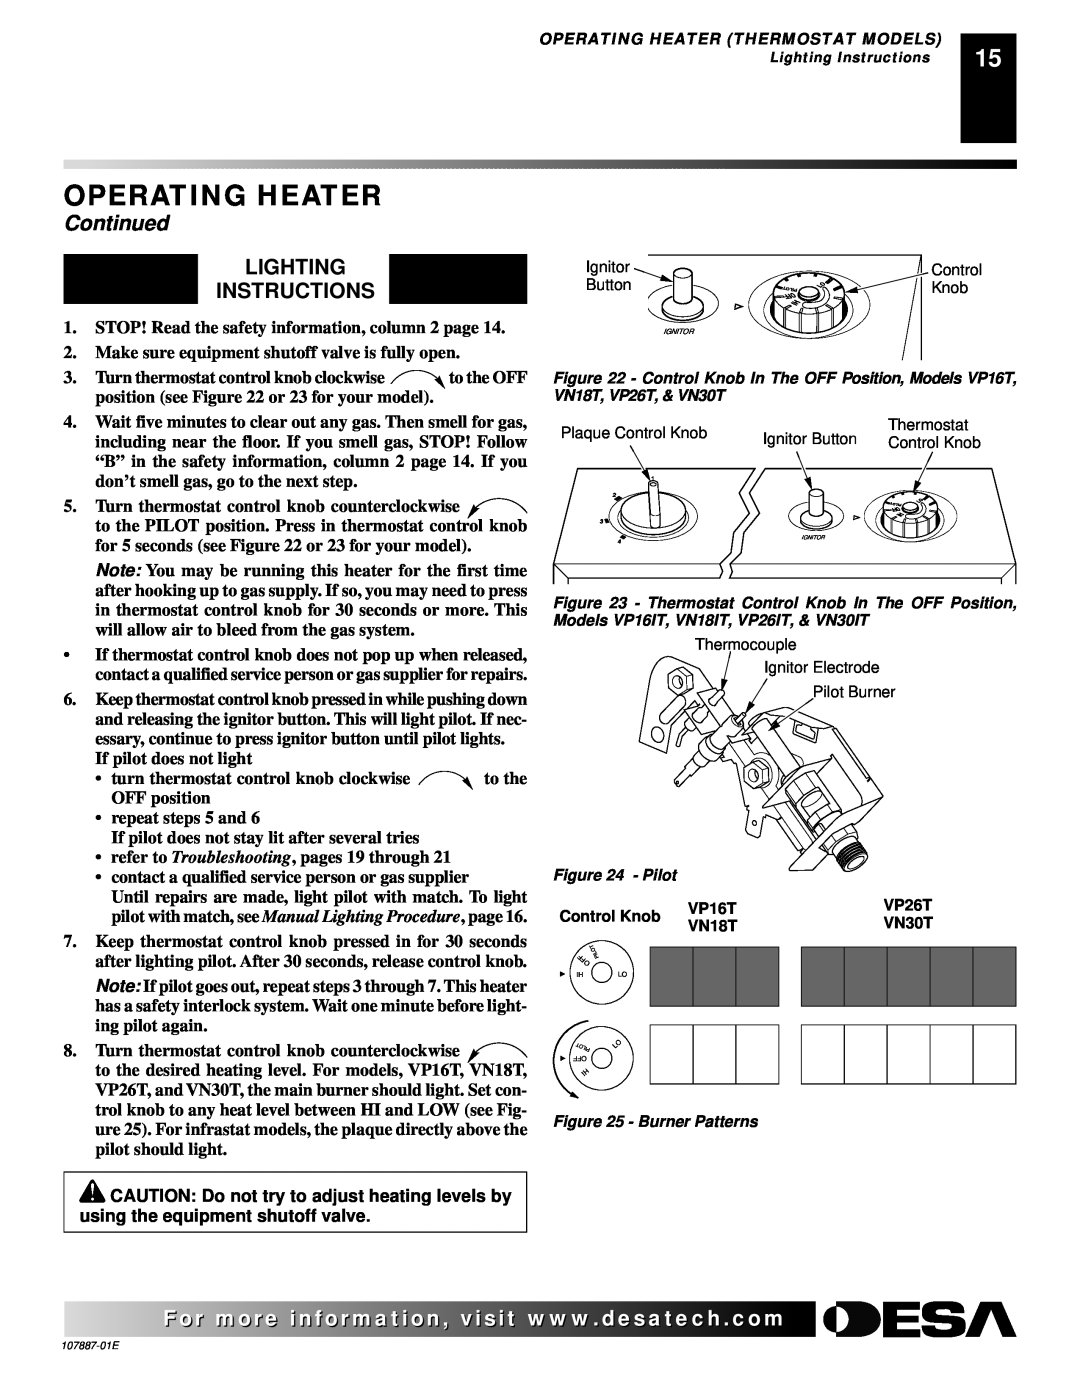 Desa VP16, VN18, VP26 Operating Heater, Continued, Lighting Instructions, STOP! Read the safety information, column 2 page 